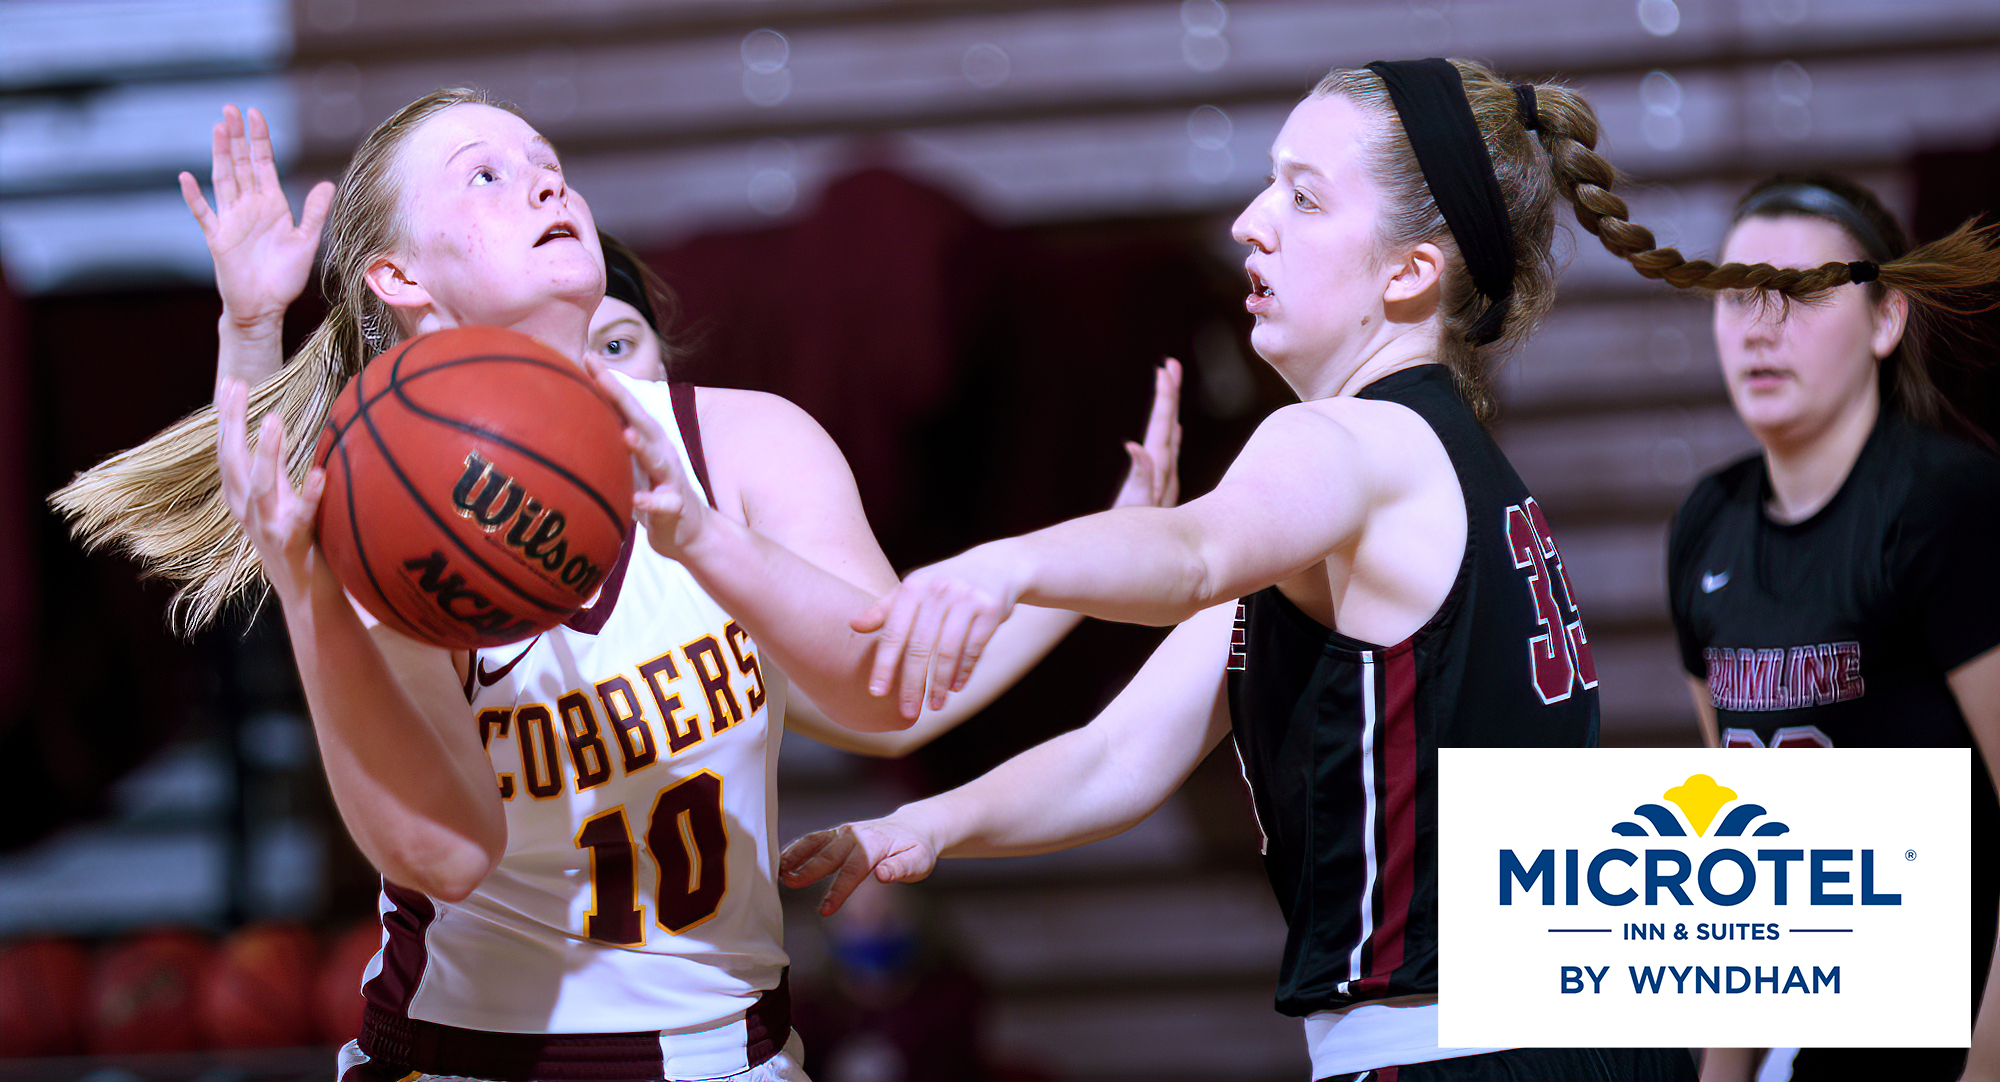 Senior Elizabeth Birkemeyer drives to the basket during the second half of the Cobbers' game with Hamline. She finished with a career-high 21 points on the night.